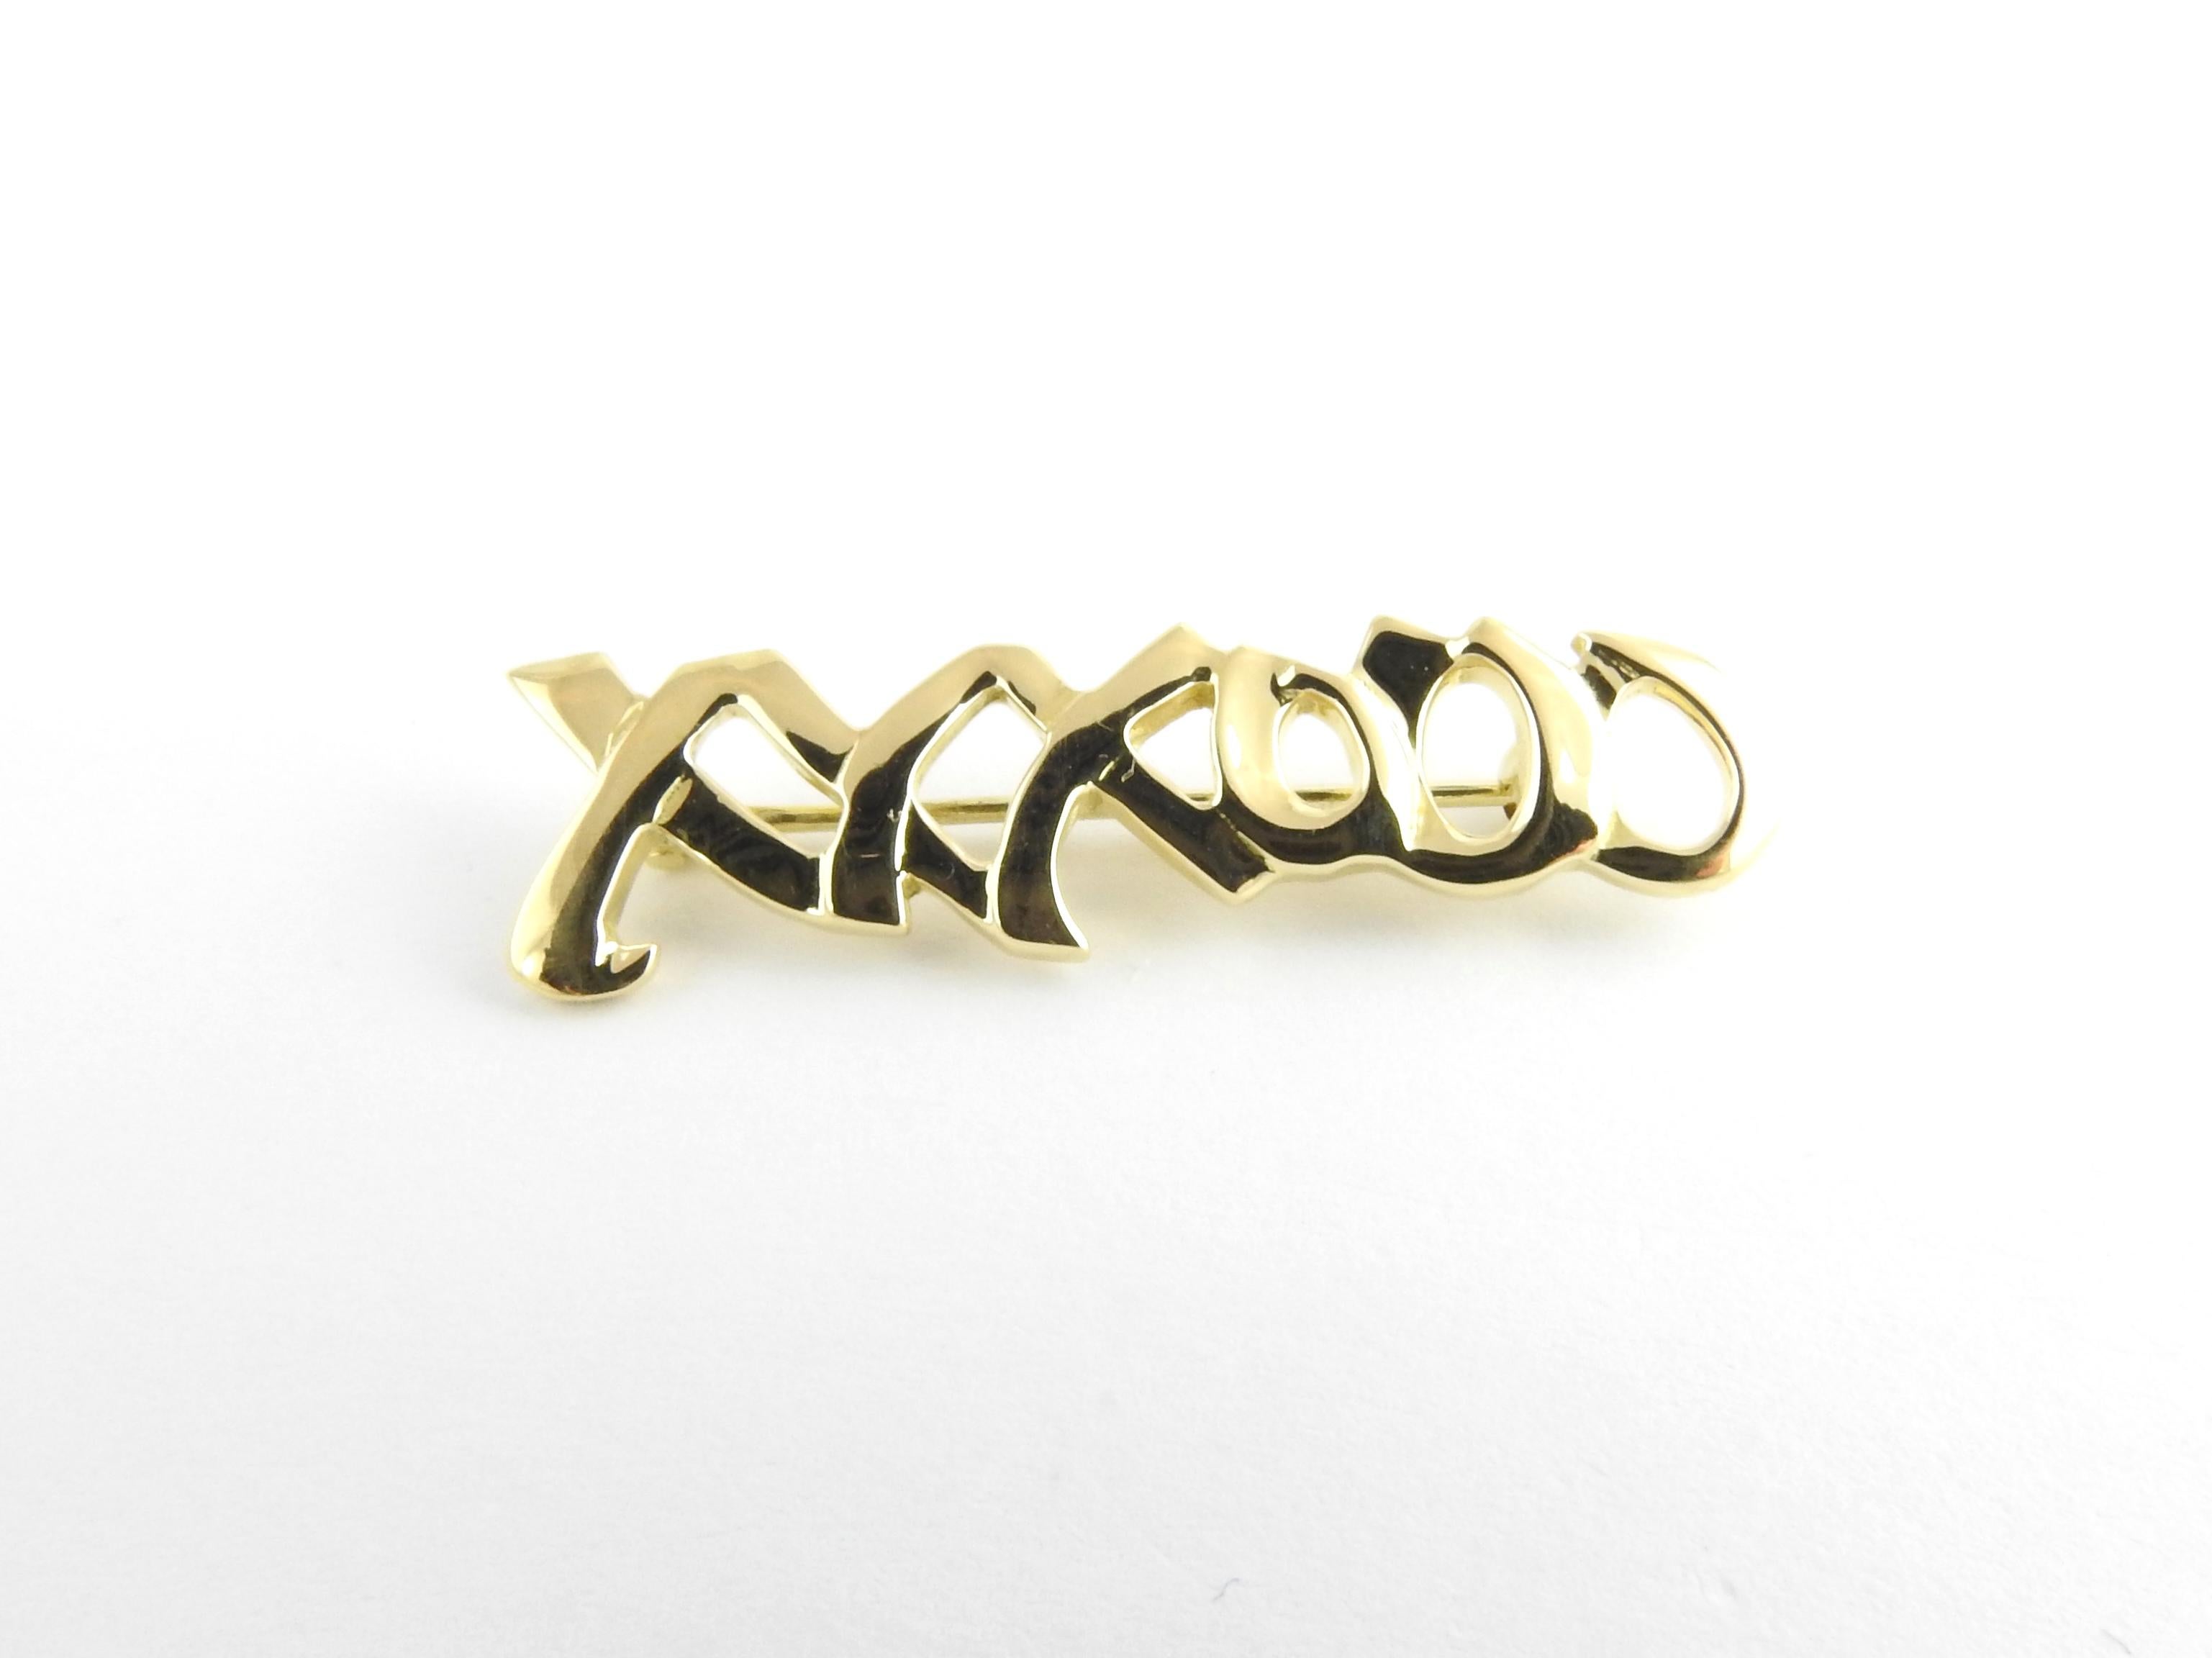 Tiffany & Co. Paloma Picasso 18K Yellow Gold XO Hugs and Kisses Brooch / Pin

This authentic Tiffany & Co. Paloma Picasso Brooch is approx. 36 mm x 10 mm

Stamped 1983 Tiffany & Co. Paloma Picasso 750

4.5 g / 2.8 dwt

Very good preowned condition.